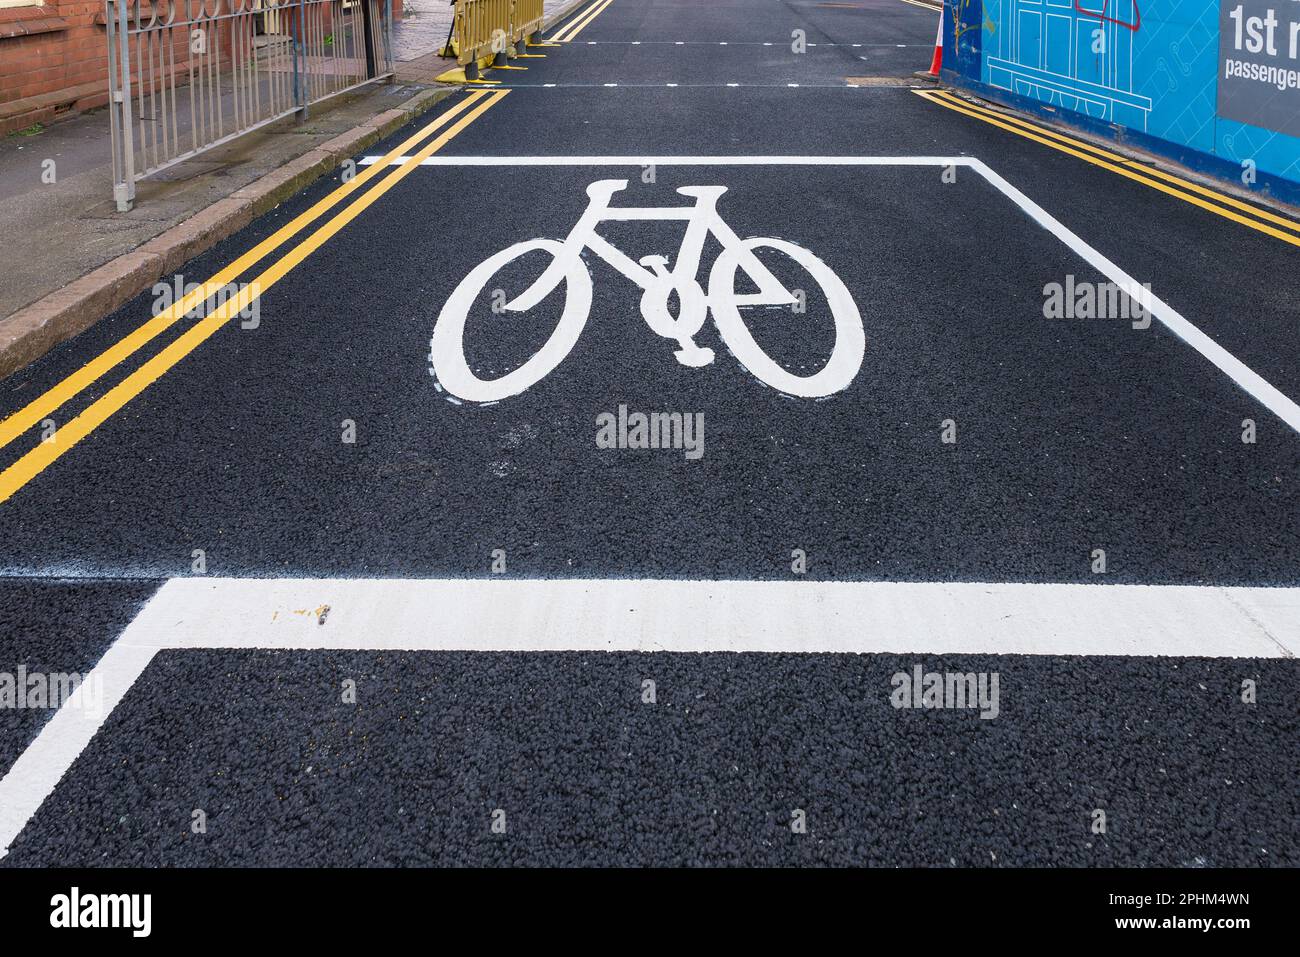 Outline of a bicycle painted on tarmac road showing space for cyclists to wait at traffic lights Stock Photo